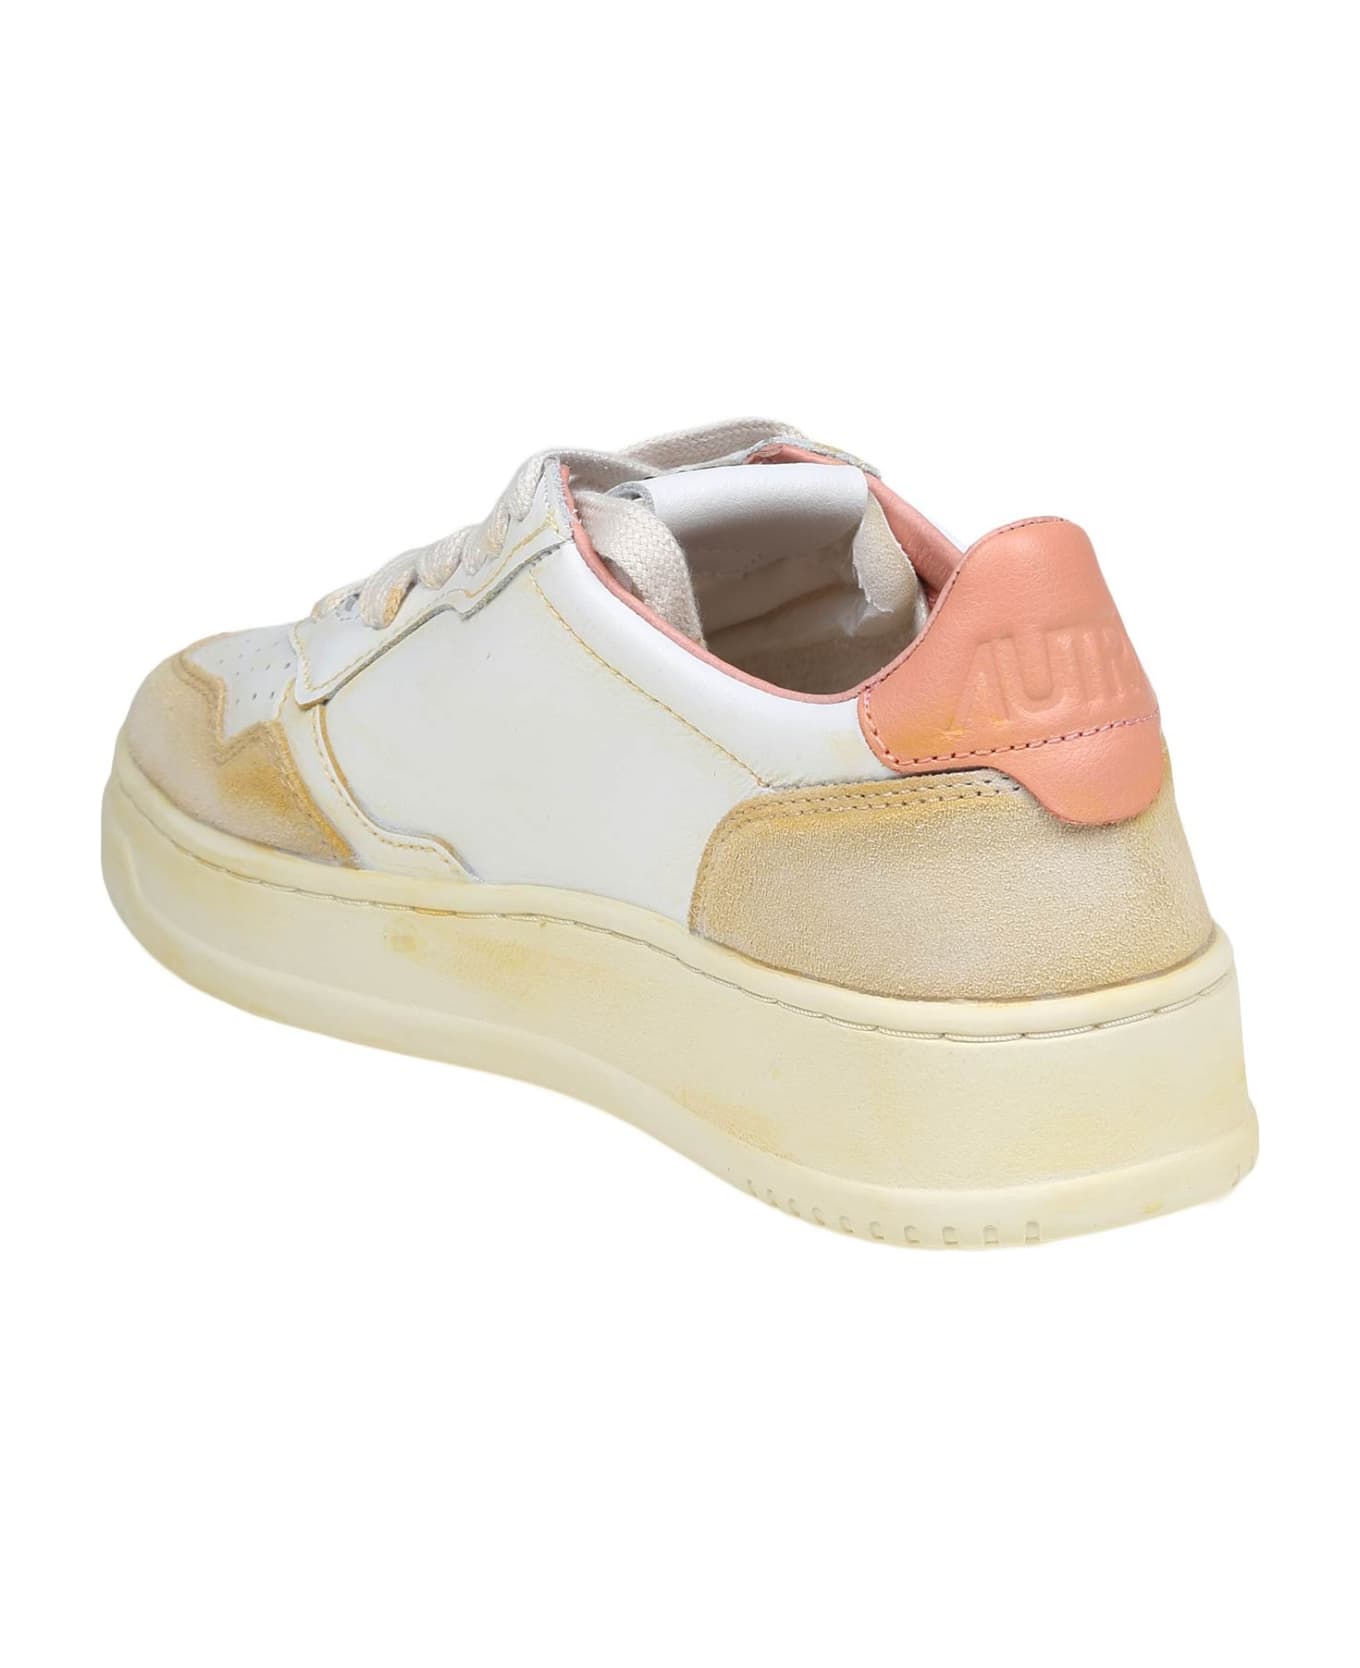 Autry Super Vintage Sneakers In White And Pink Leather And Suede - White/Pink